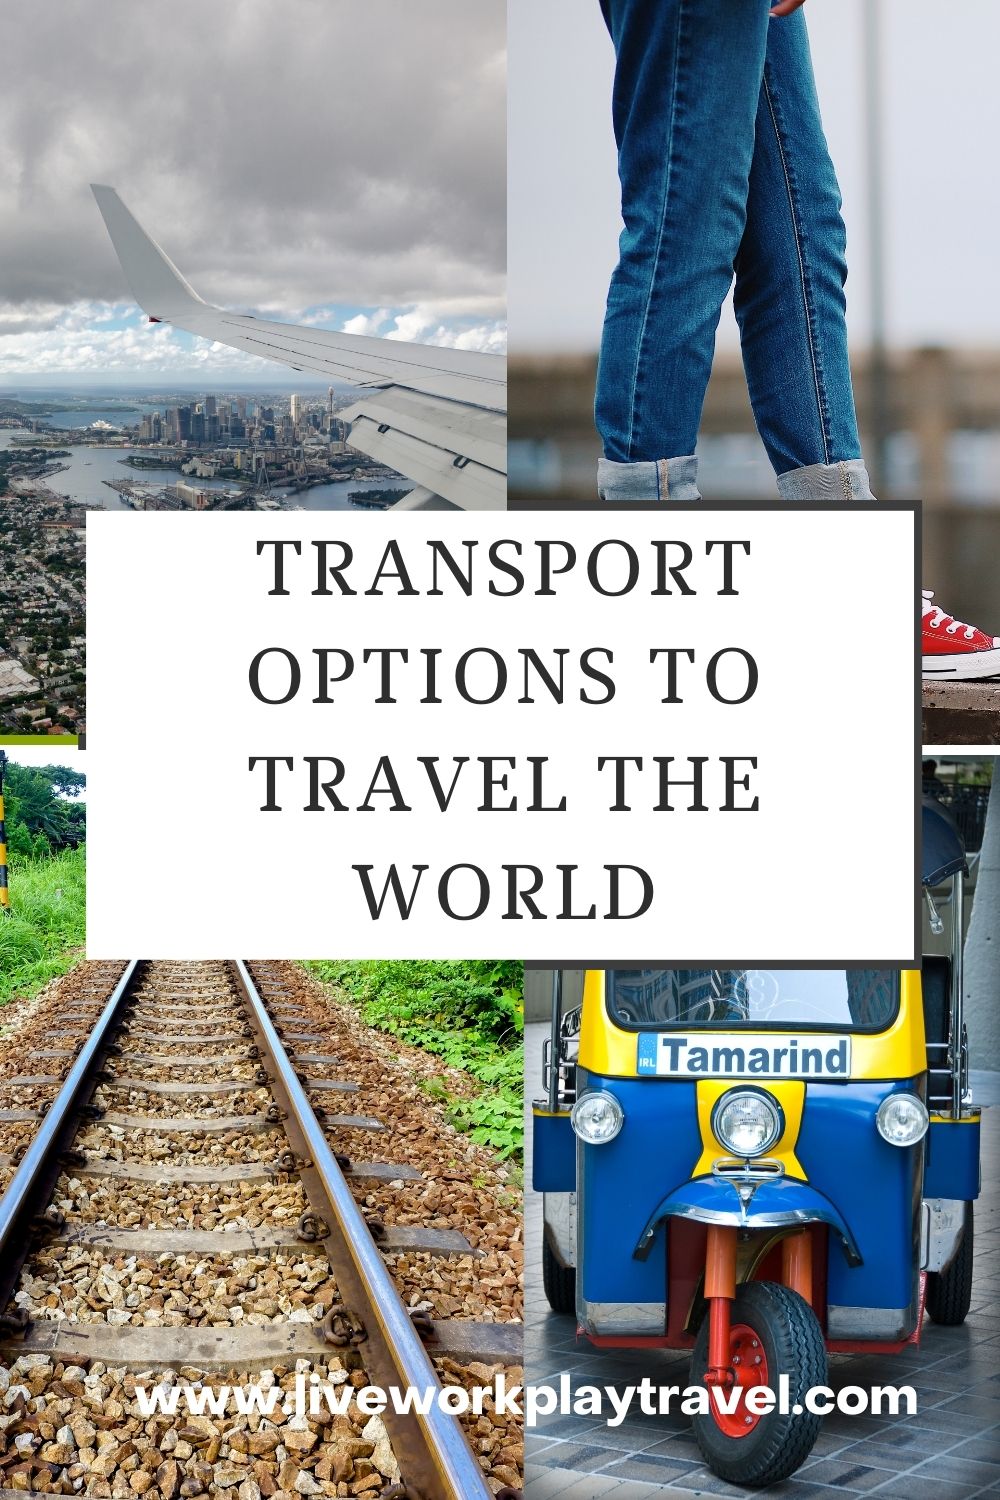 Transport Options To Travel The World Include Walking, Train Travel, Tuk-Tuk and Flying.